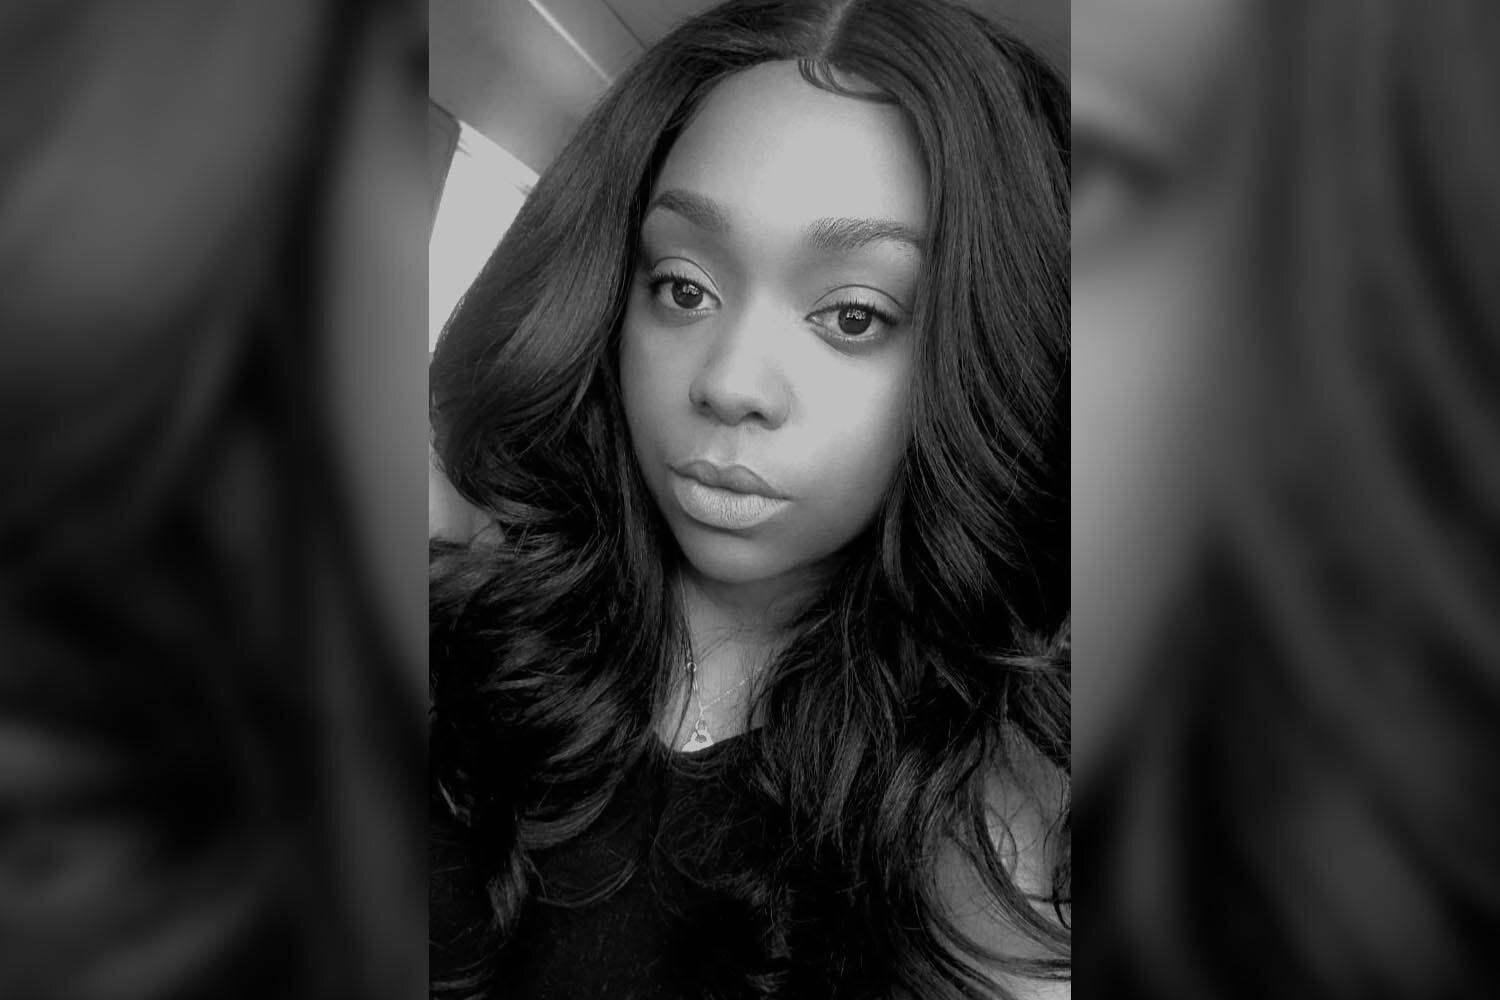 Ashante Clay was among the 1.2 million federal contractors who were affected when the government shut down for 35 days in Dec